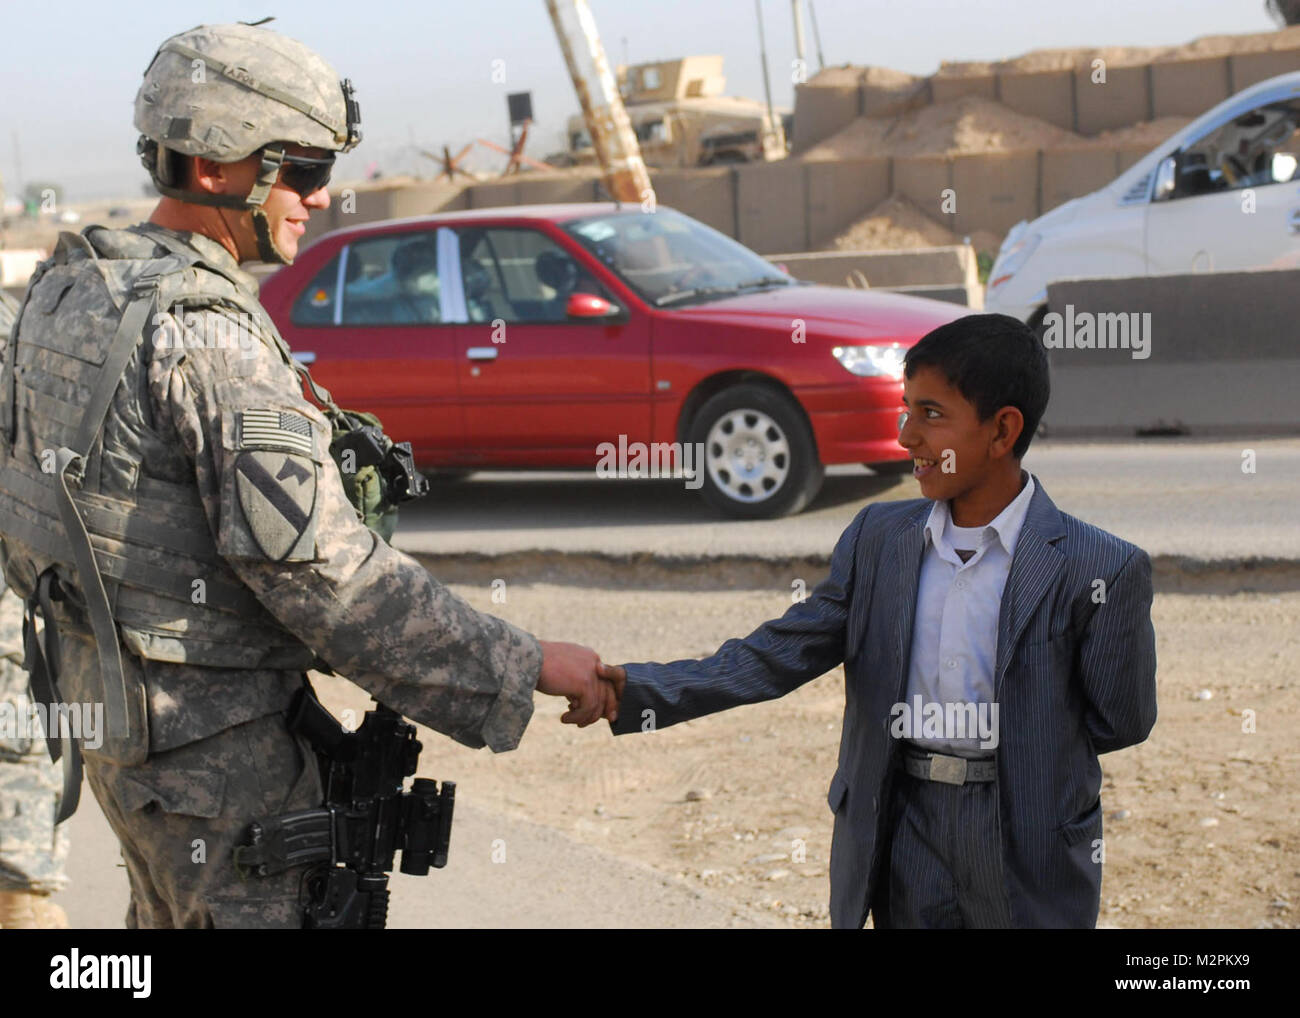 Shaking Hands CONTINGENCY OPERATING SITE WARRIOR, Iraq – Spc. Shane Darst, an armor crewmember serving with Company D, 2nd Battalion, 12th Cavalry Regiment, attached to the 1st Advise and Assist Task Force, 1st Infantry Division, shakes hands with a young child at a checkpoint near Contingency Operating Site Warrior, Iraq, April 3, 2011.  (U.S. Army photo by Staff Sgt. Robert DeDeaux, 1st AATF PAO, 1st Inf. Div., USD-N) Shaking Hands by United States Forces - Iraq (Inactive) Stock Photo